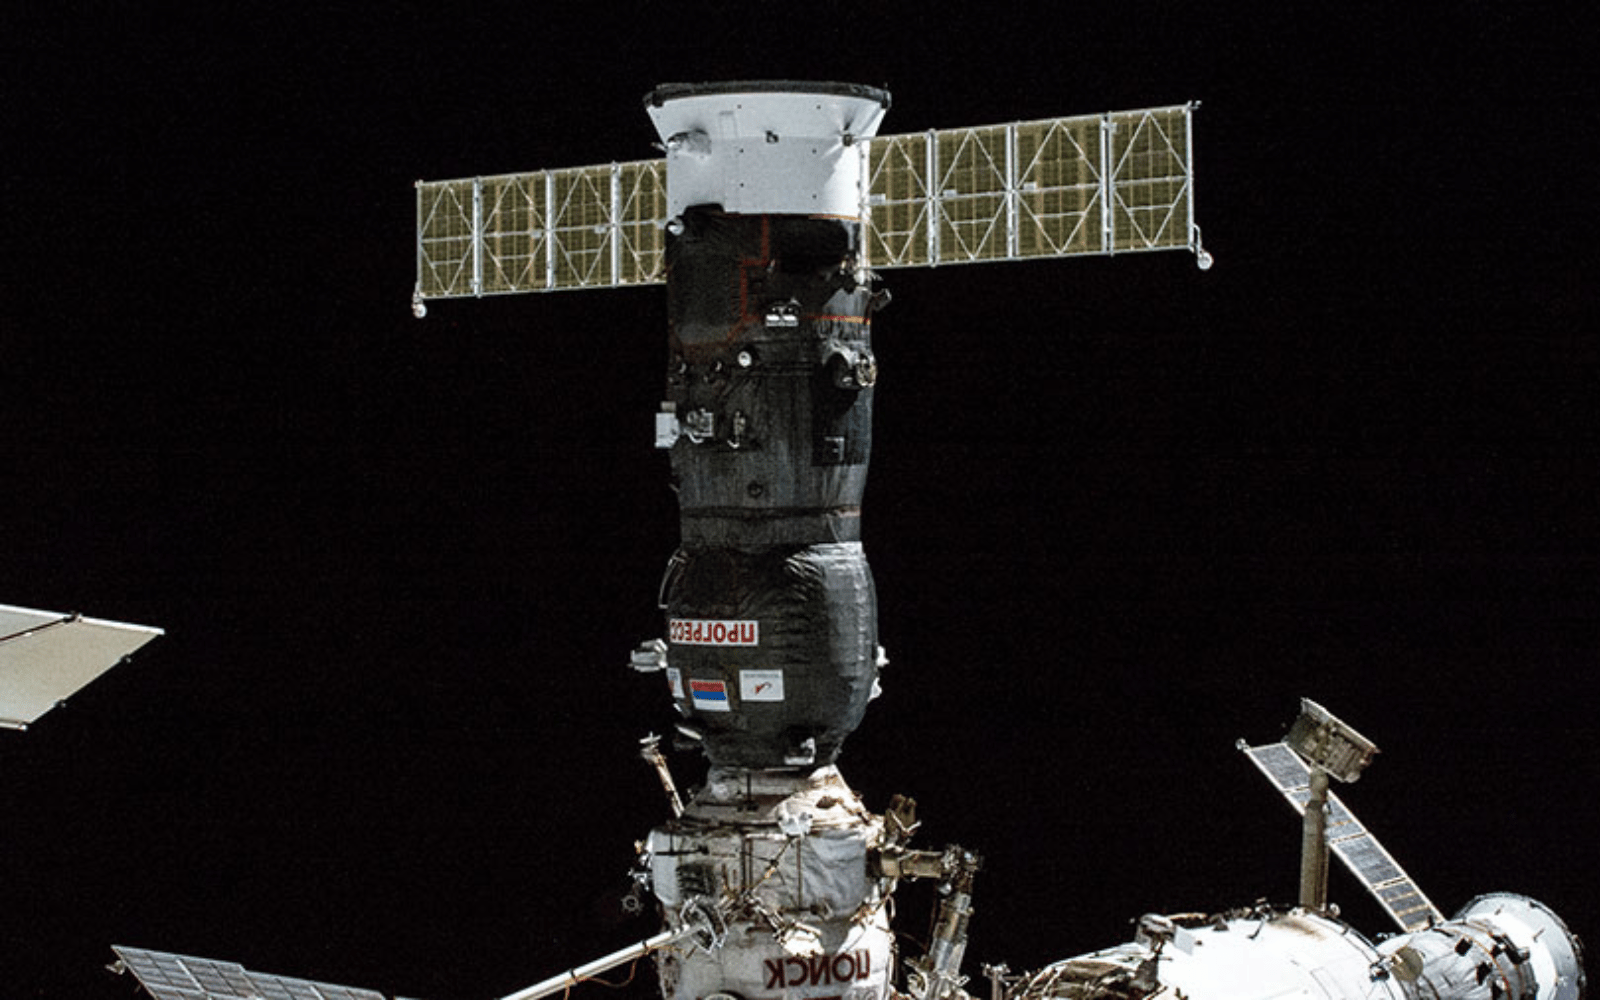 The Progress MS-21 module docked on the ISS